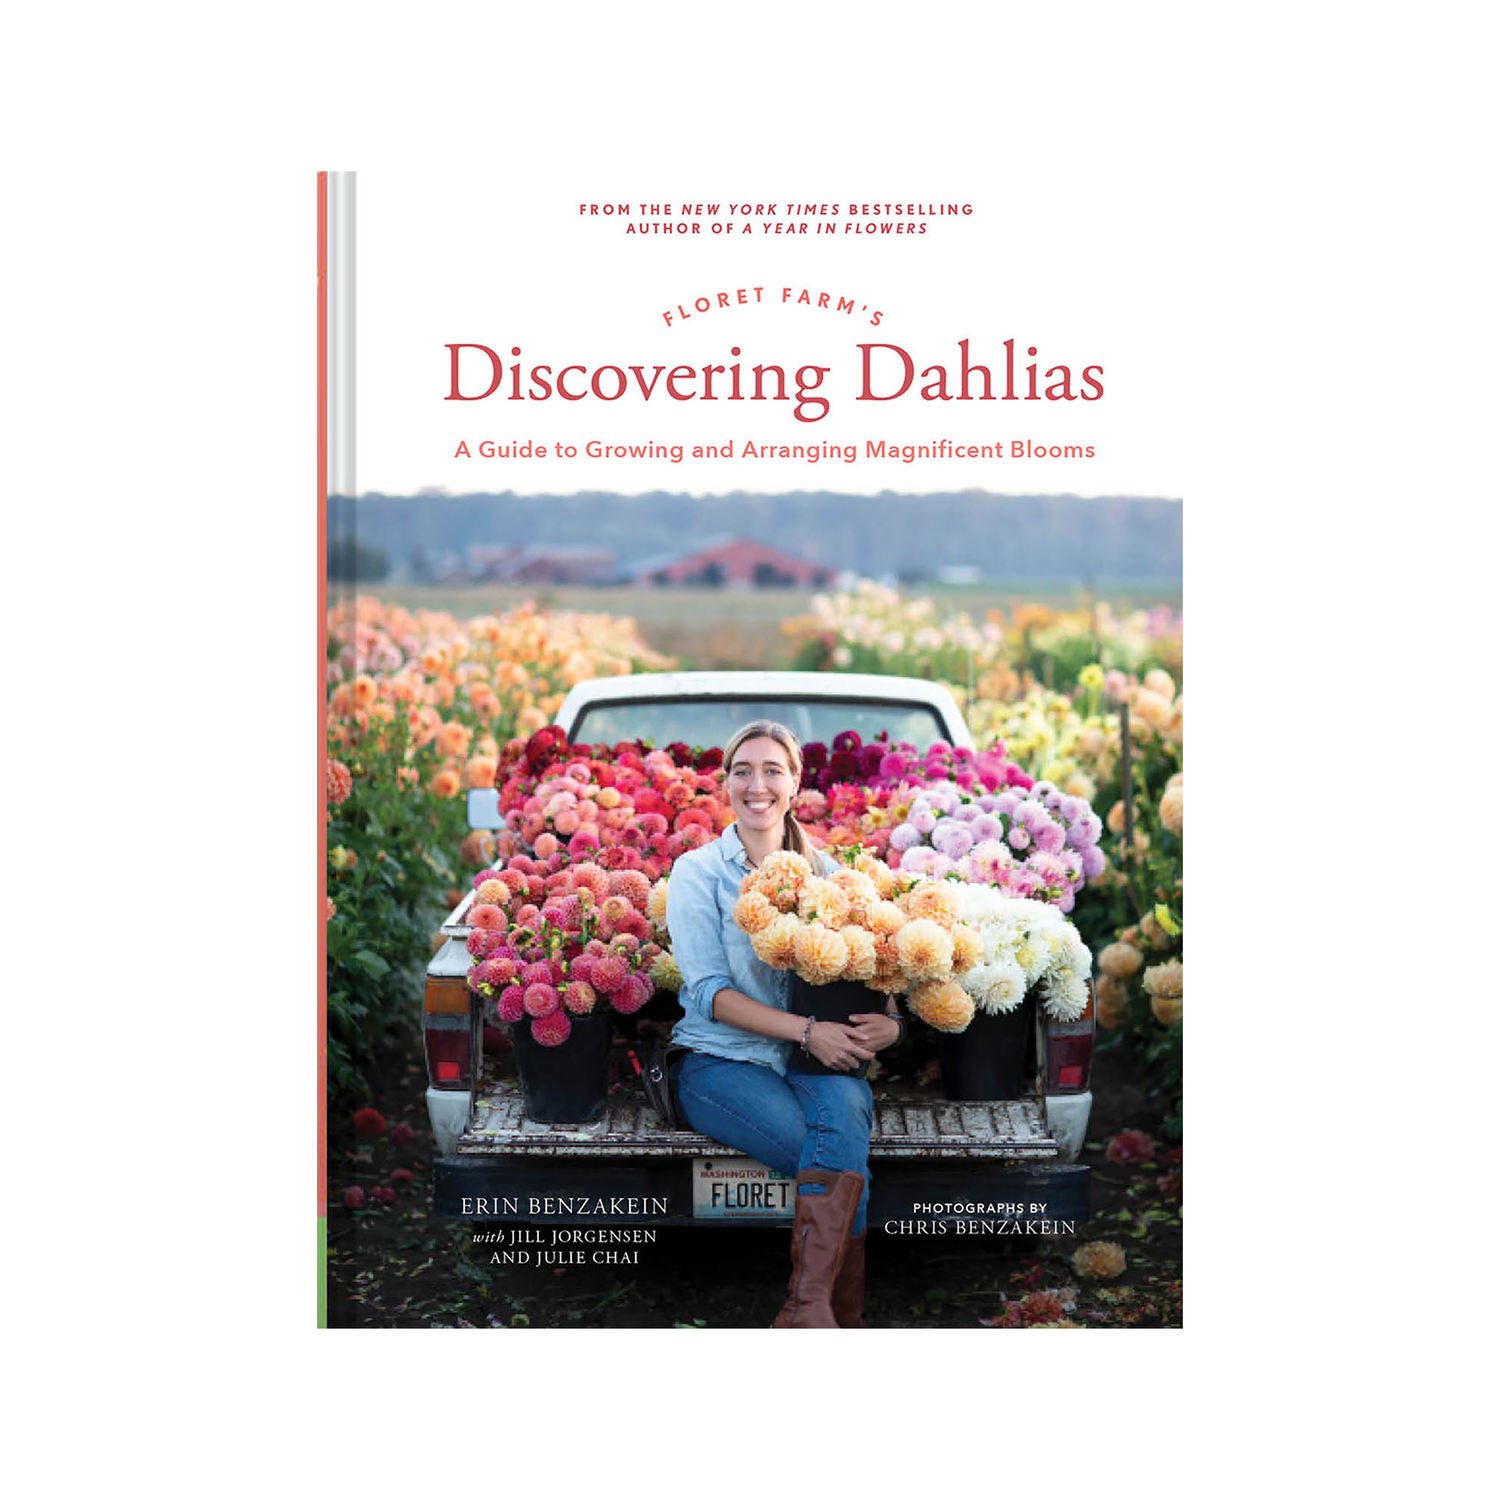 Livro Floret Farm's Discovering Dahlias a Guide to Growing and Arranging Magnificent Blooms